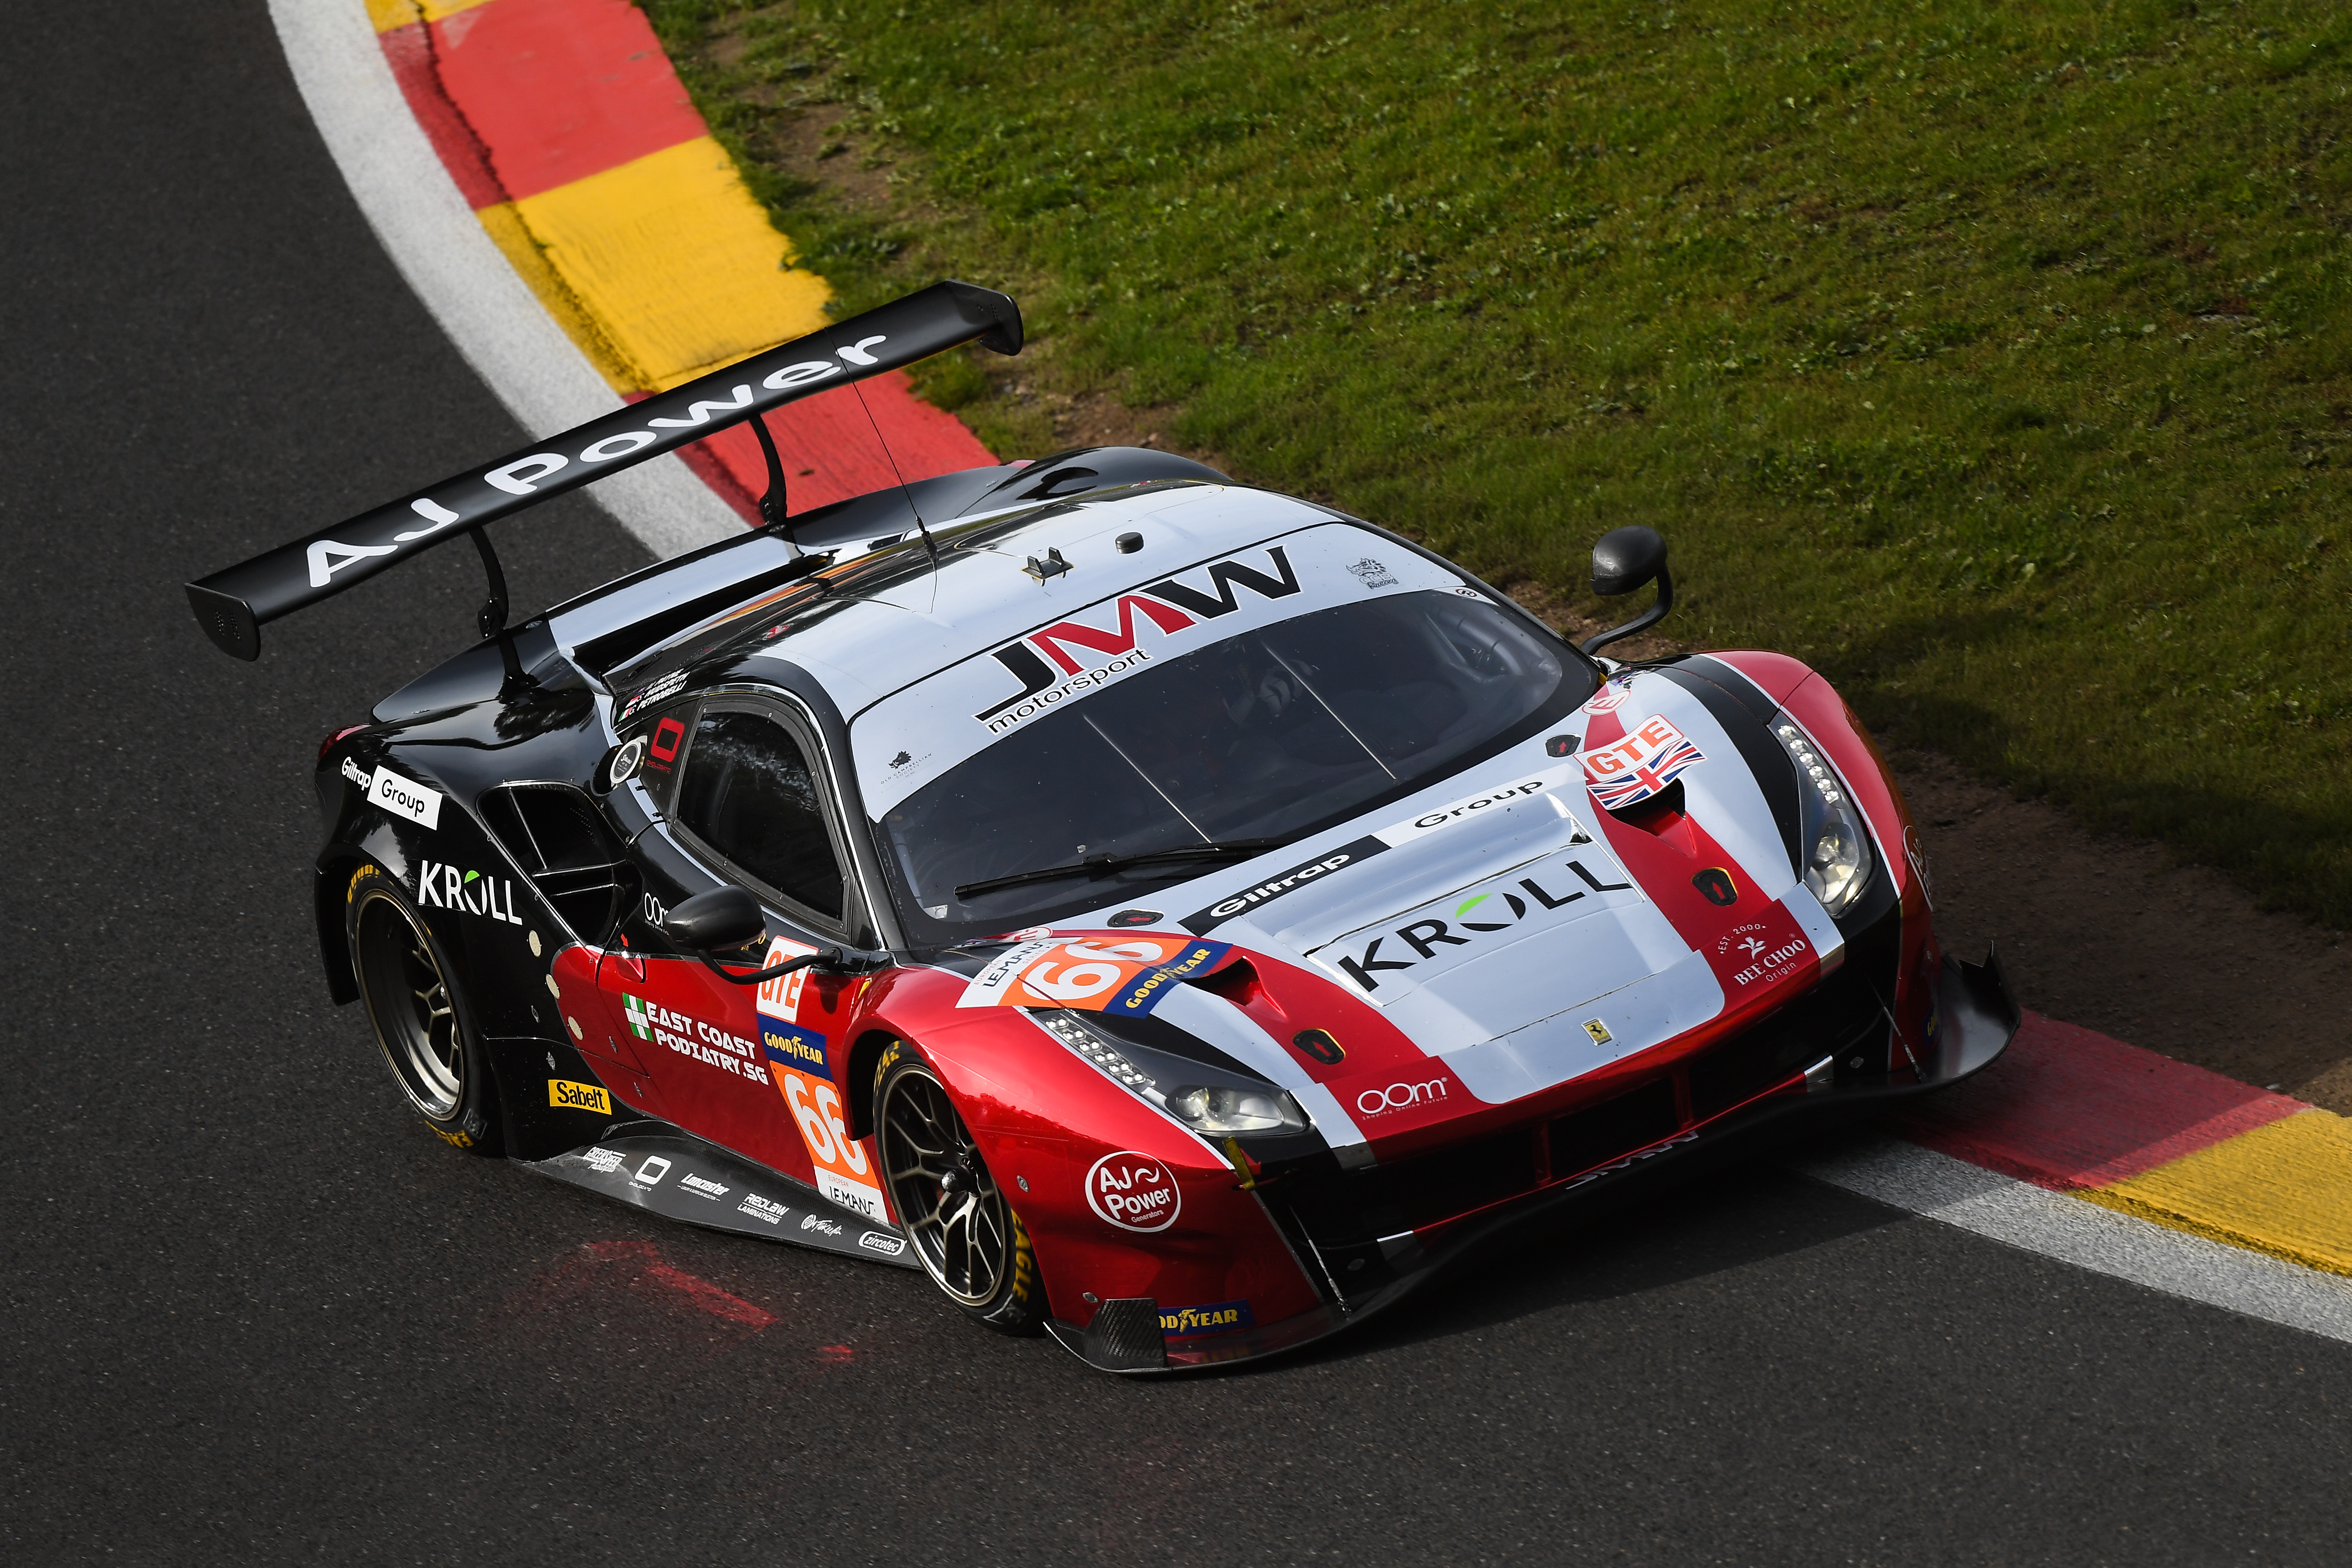 Spa Round 5 – Post Race Report